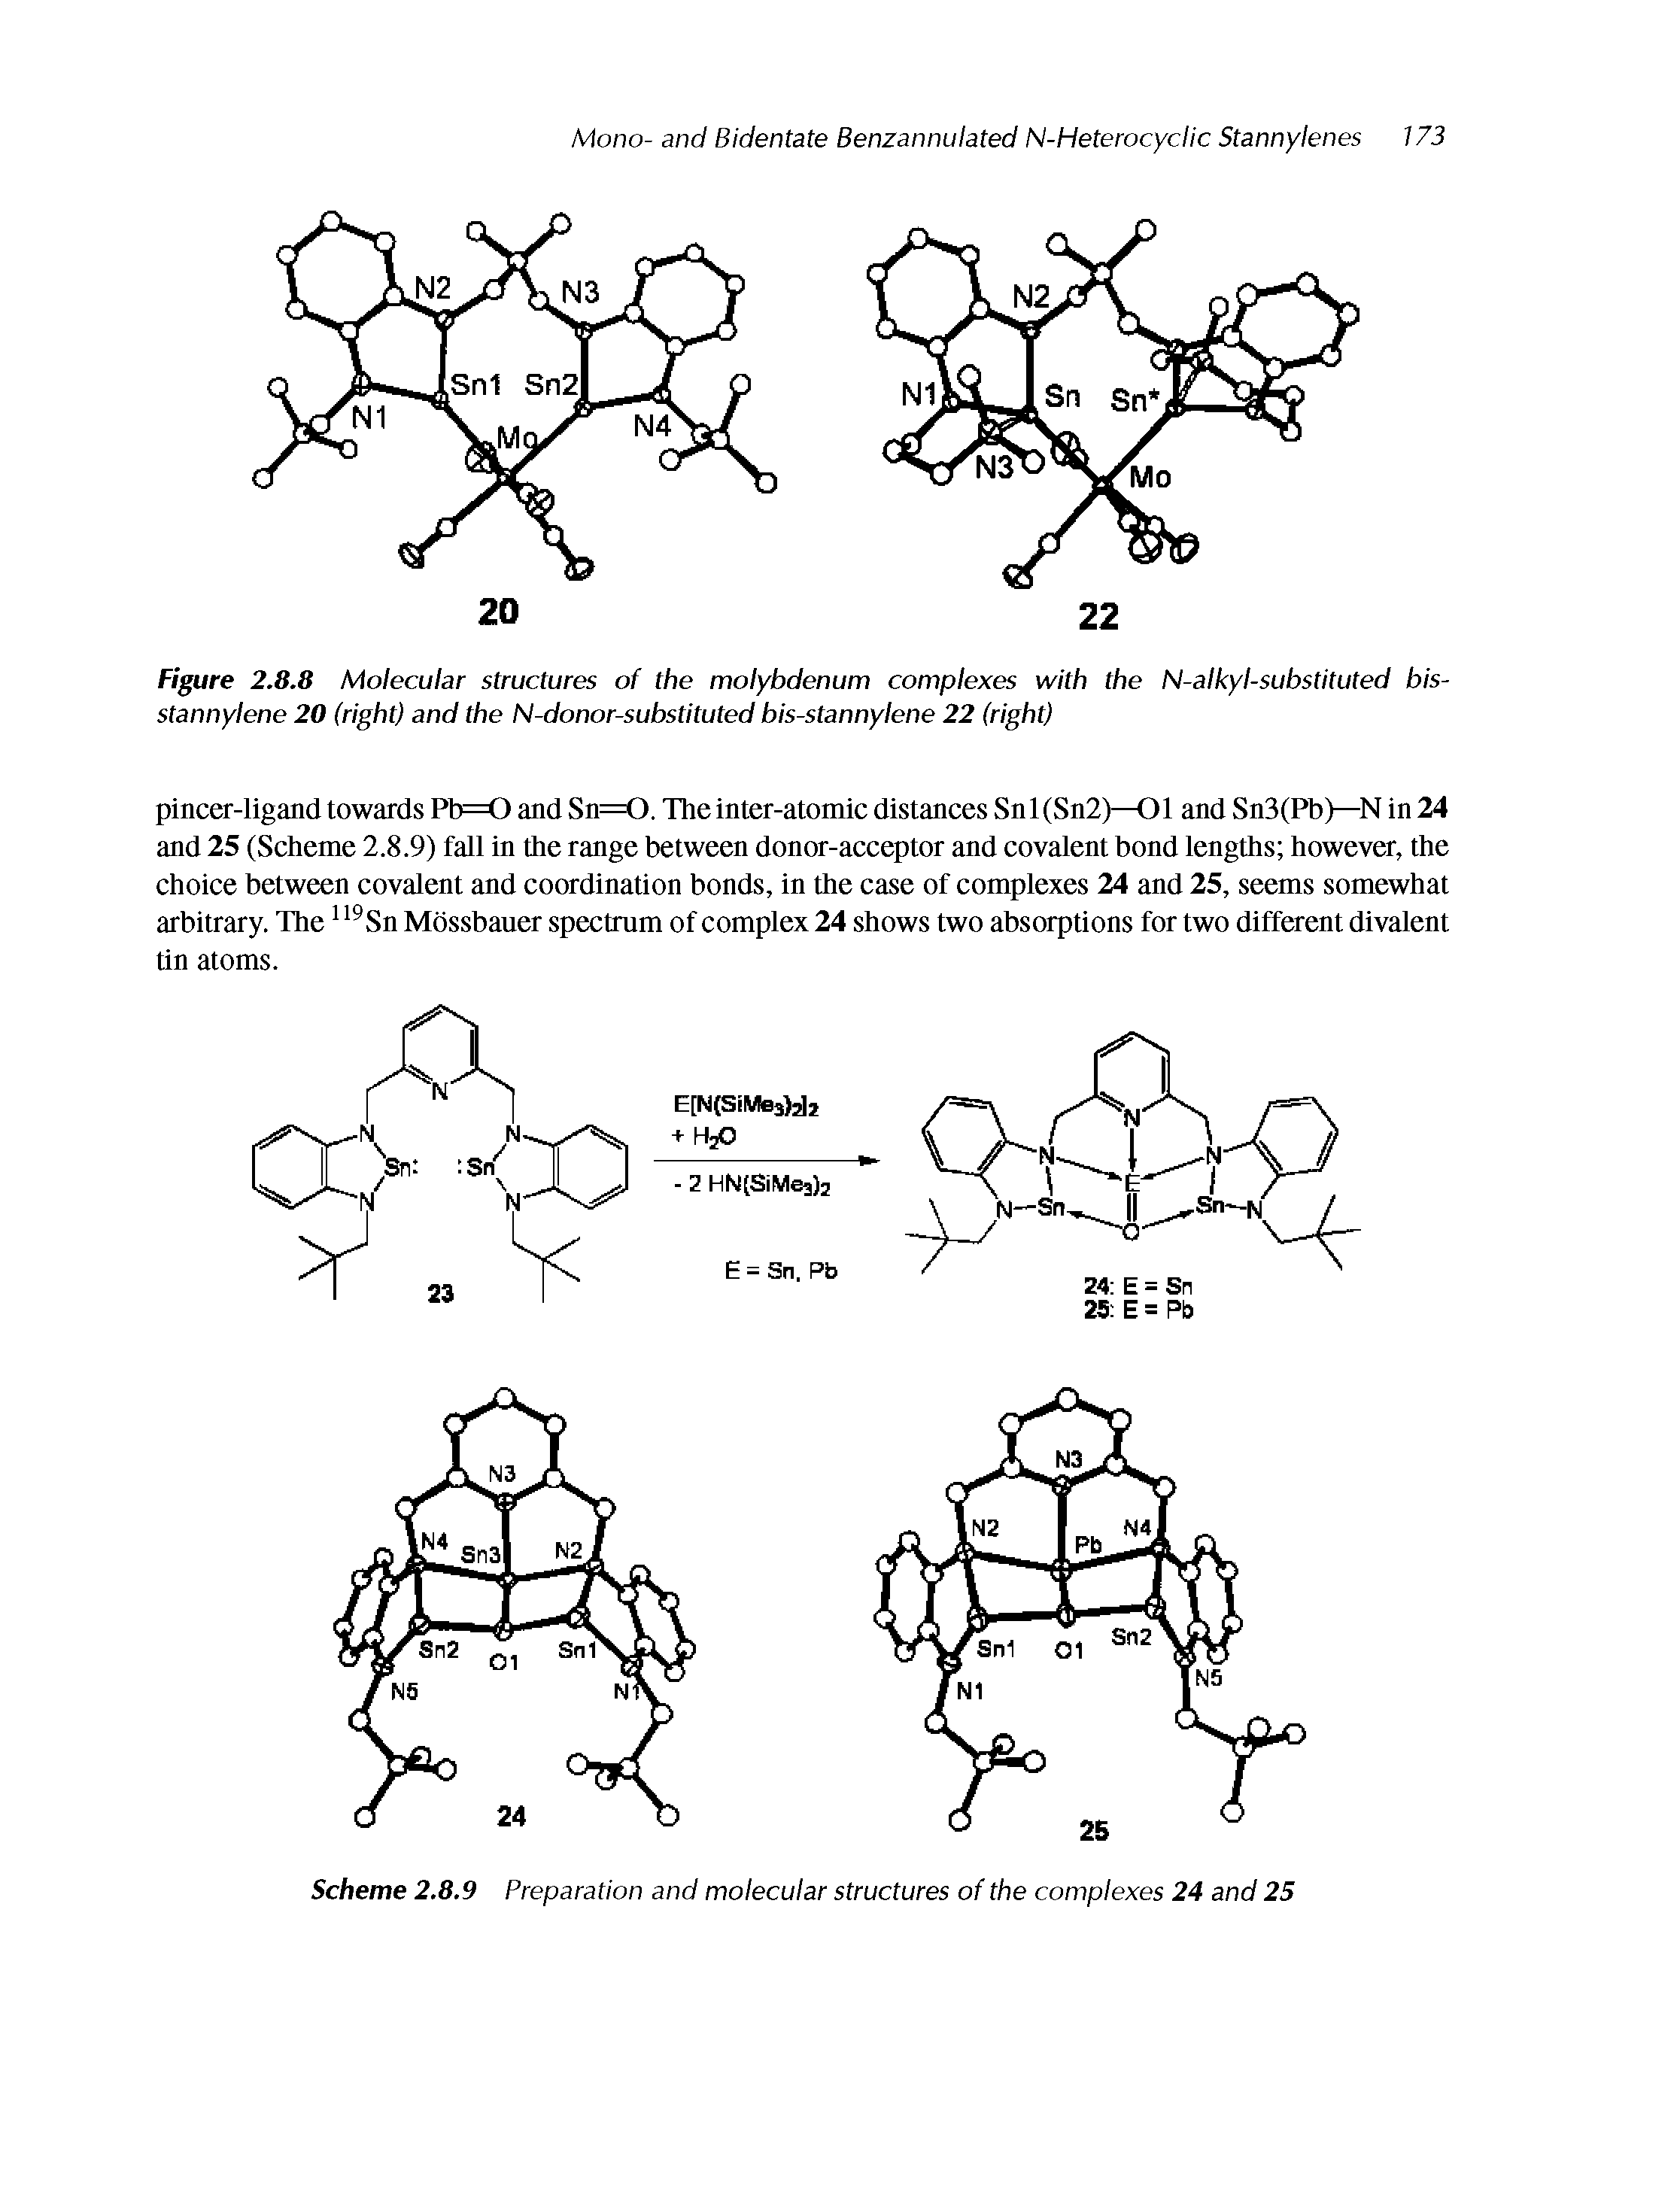 Figure 2.8.8 Molecular structures of the molybdenum complexes with the N-alkyl-substituted bis-stannylene 20 (right) and the N-donor-substituted bis-stannylene 22 (right)...